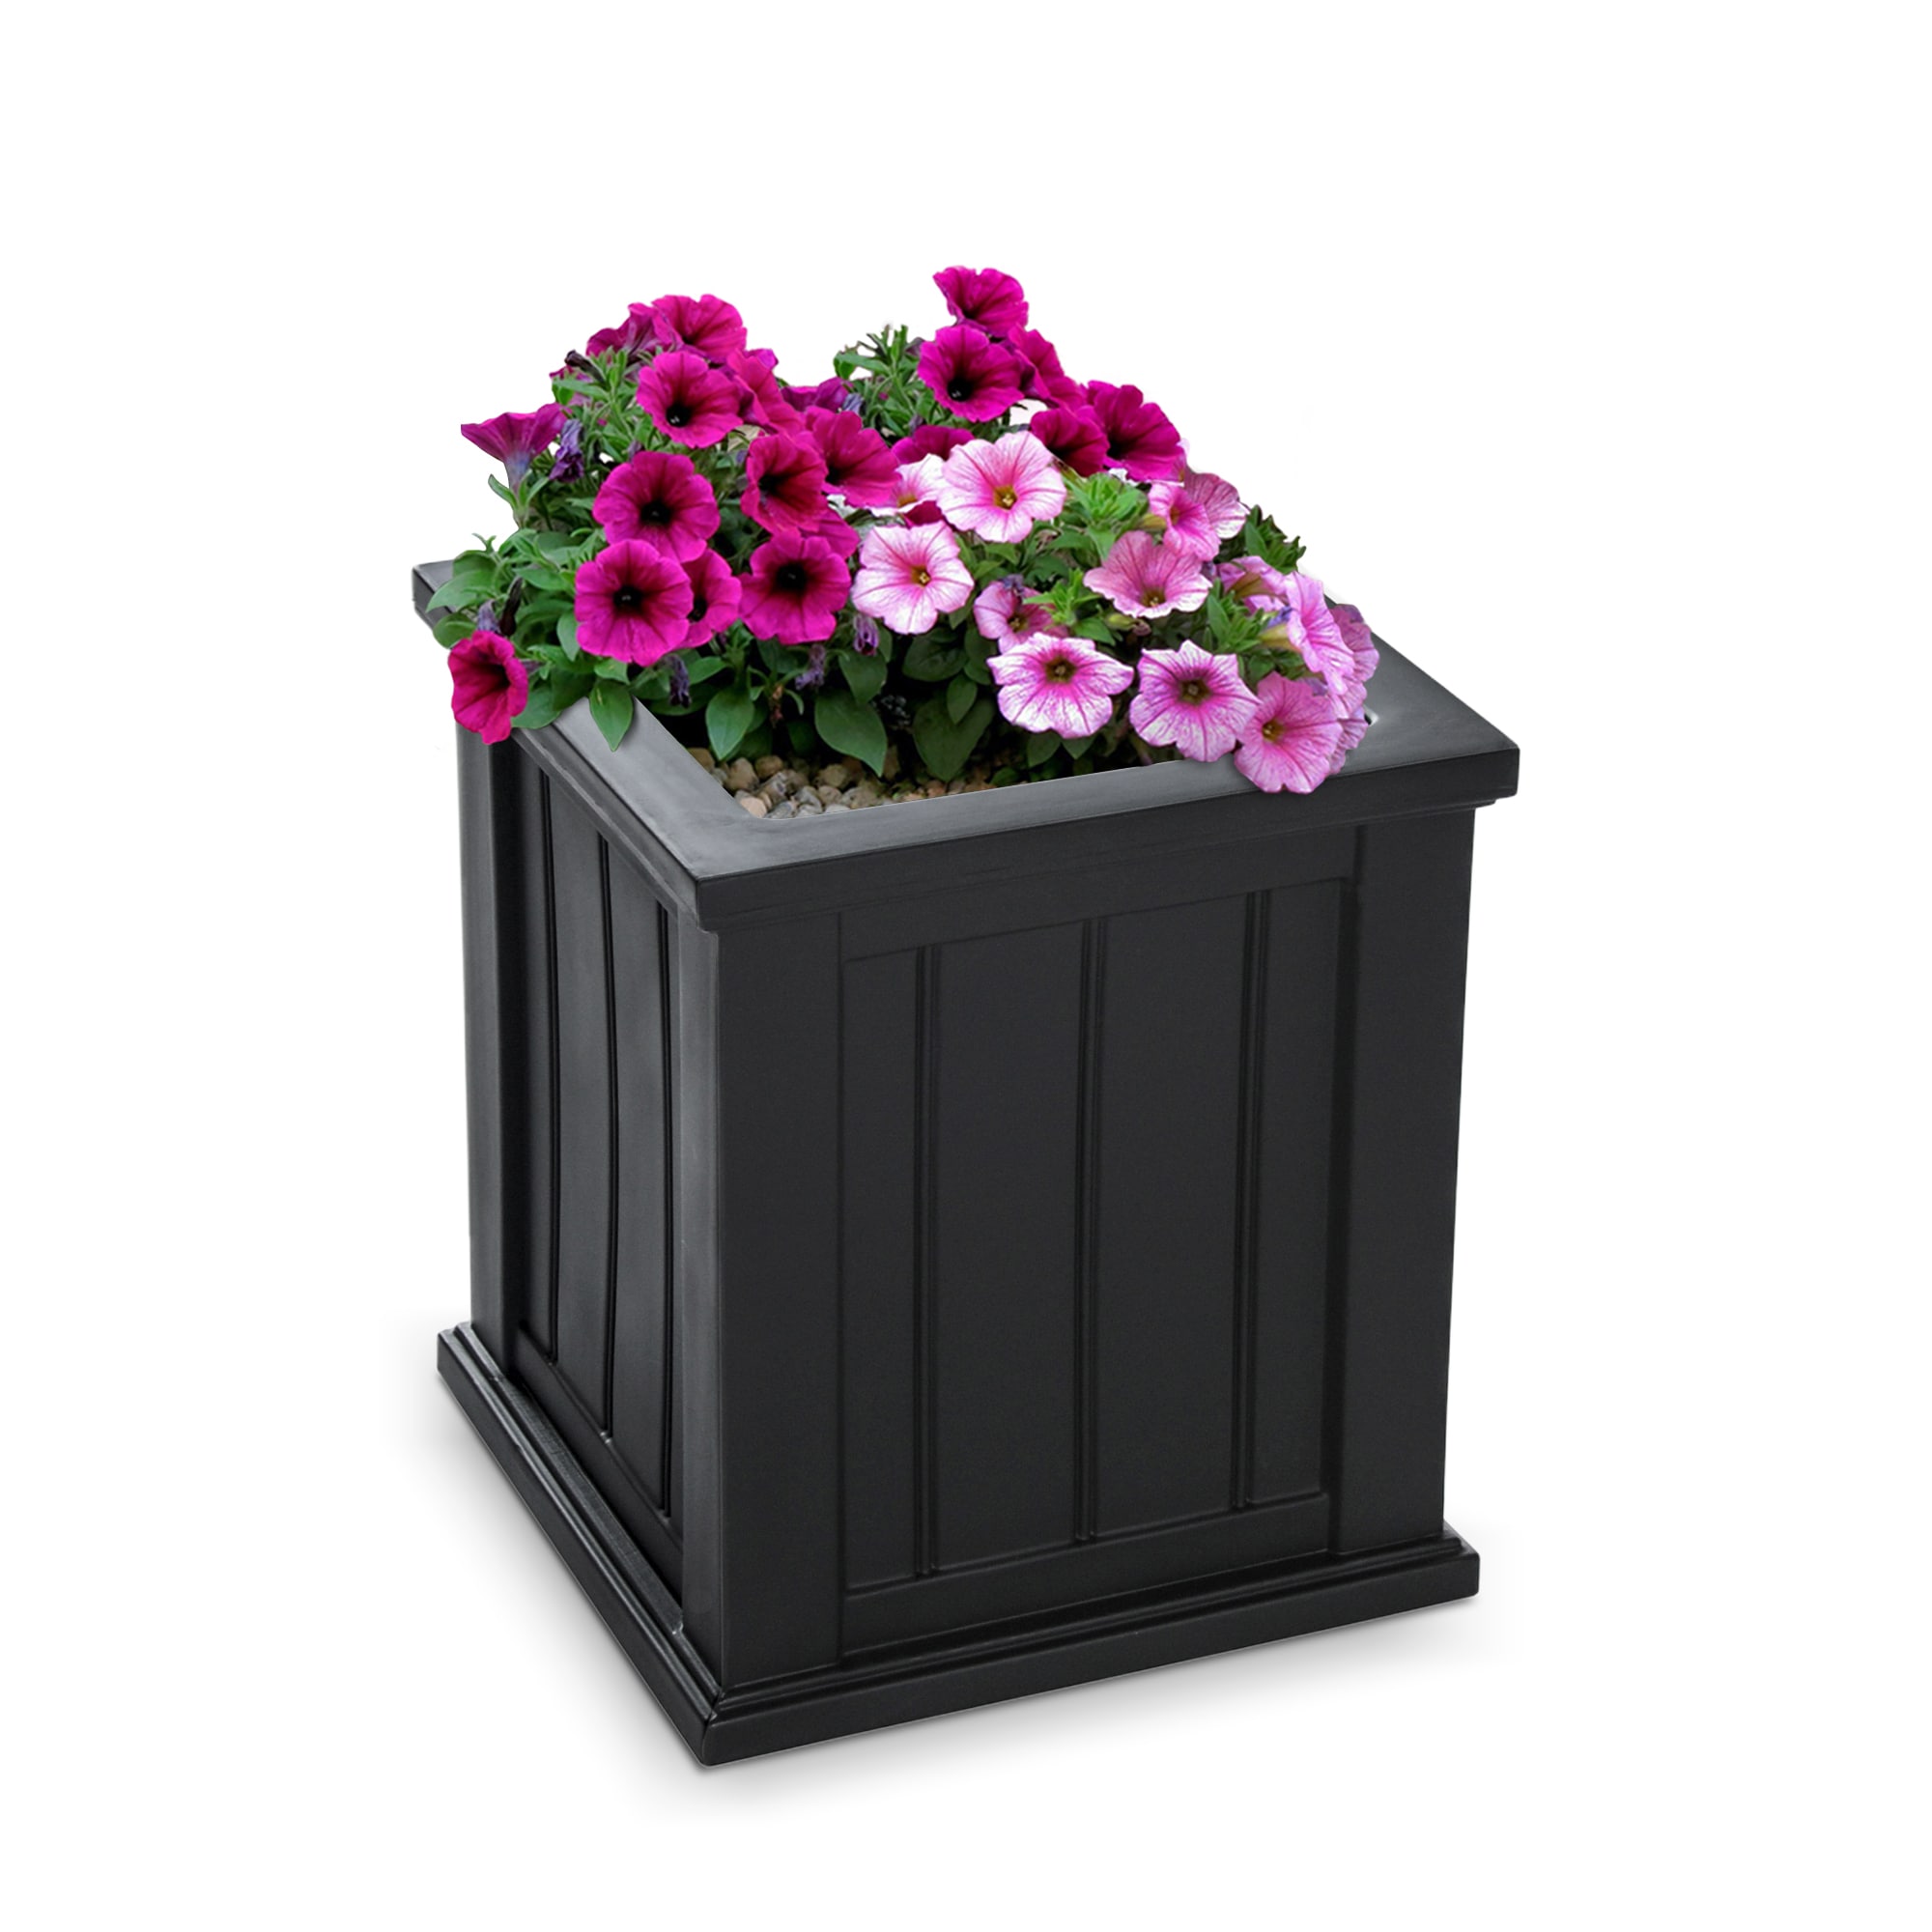 Mayne 16-in W x 16-in H Black Resin Traditional Outdoor Planter in